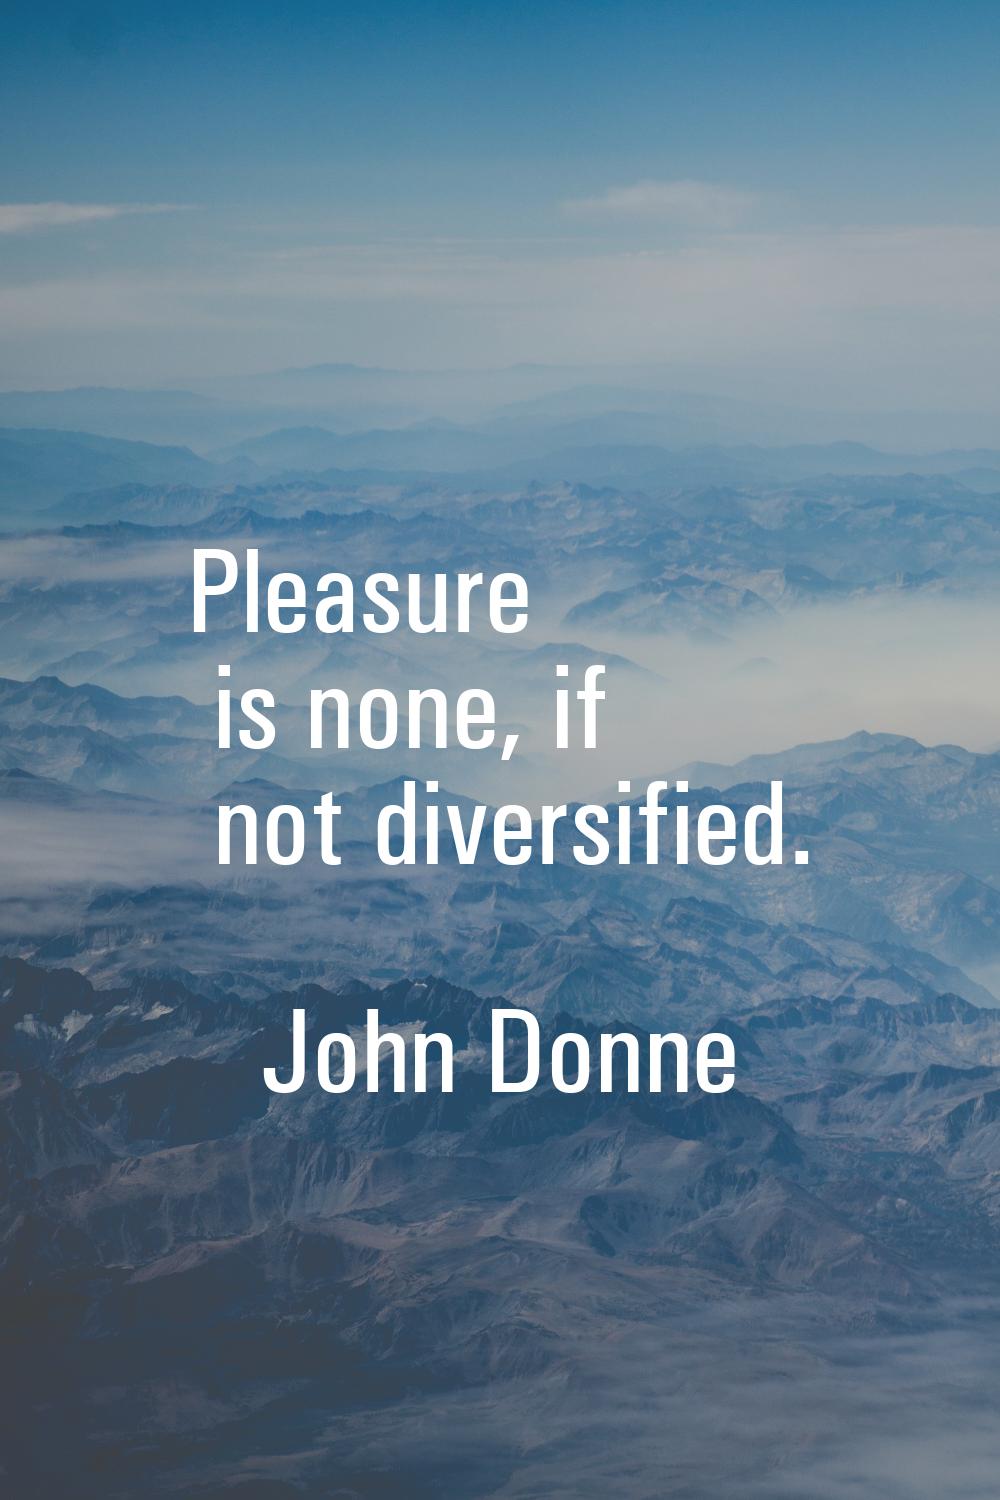 Pleasure is none, if not diversified.